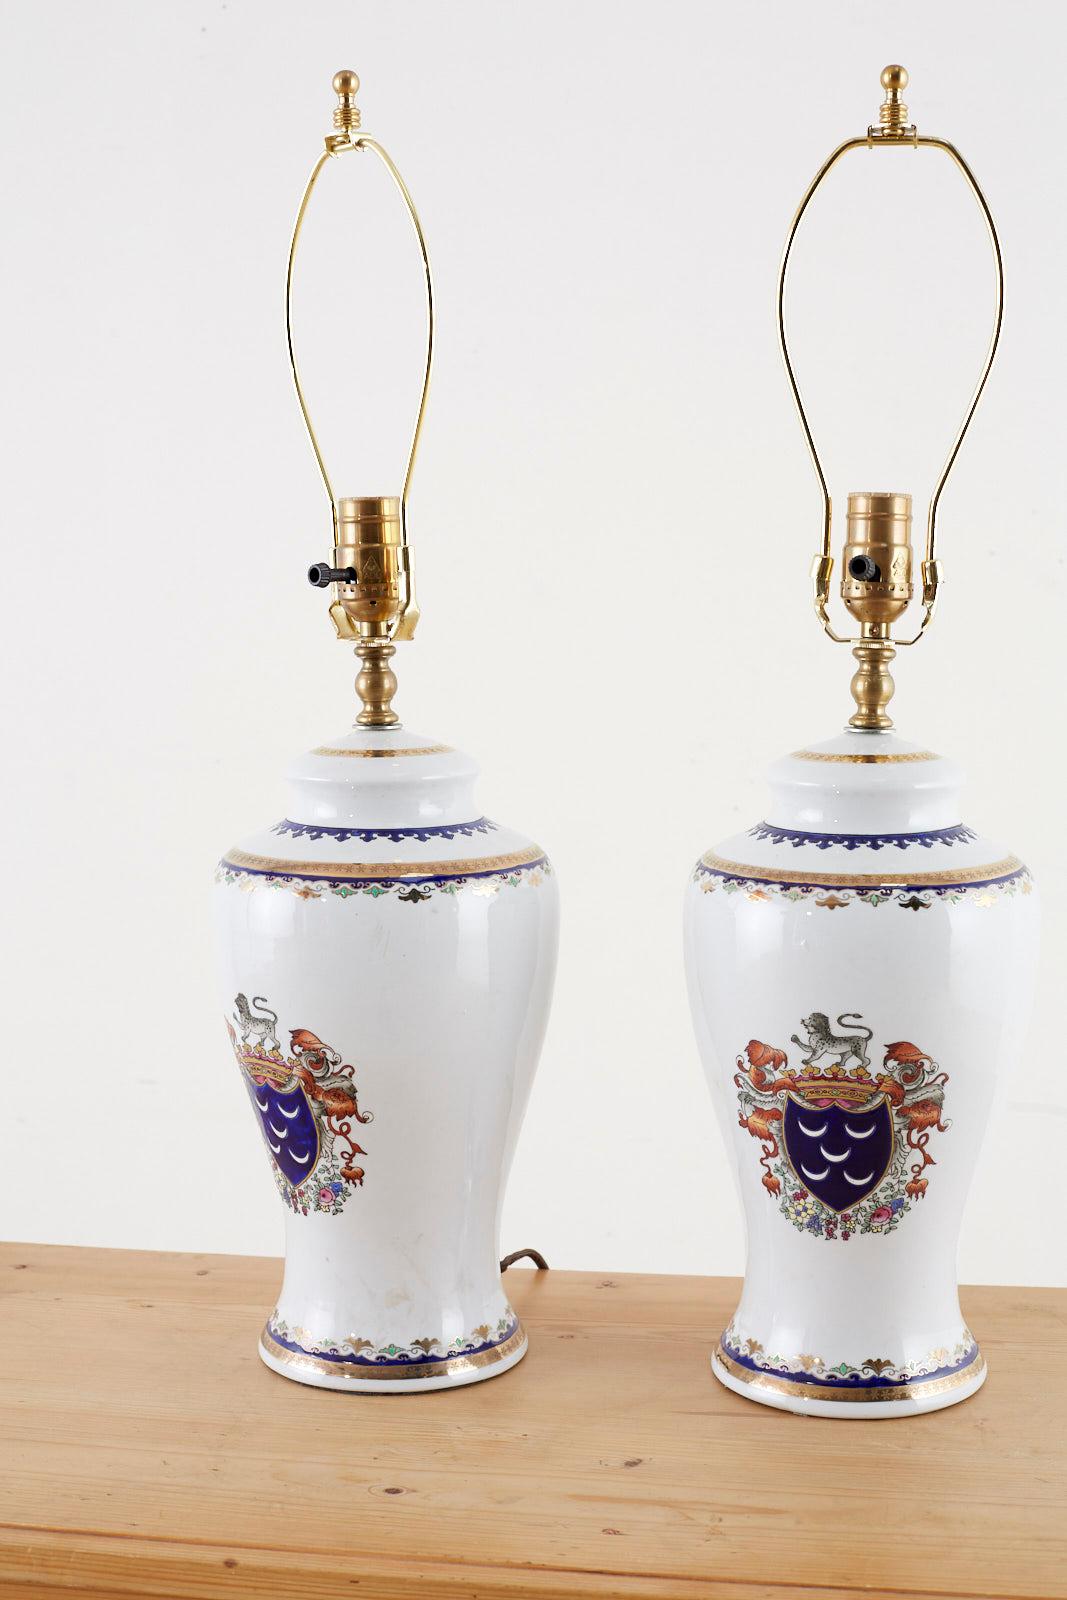 20th Century Pair of Royal Coat of Arms Porcelain Jar Table Lamps